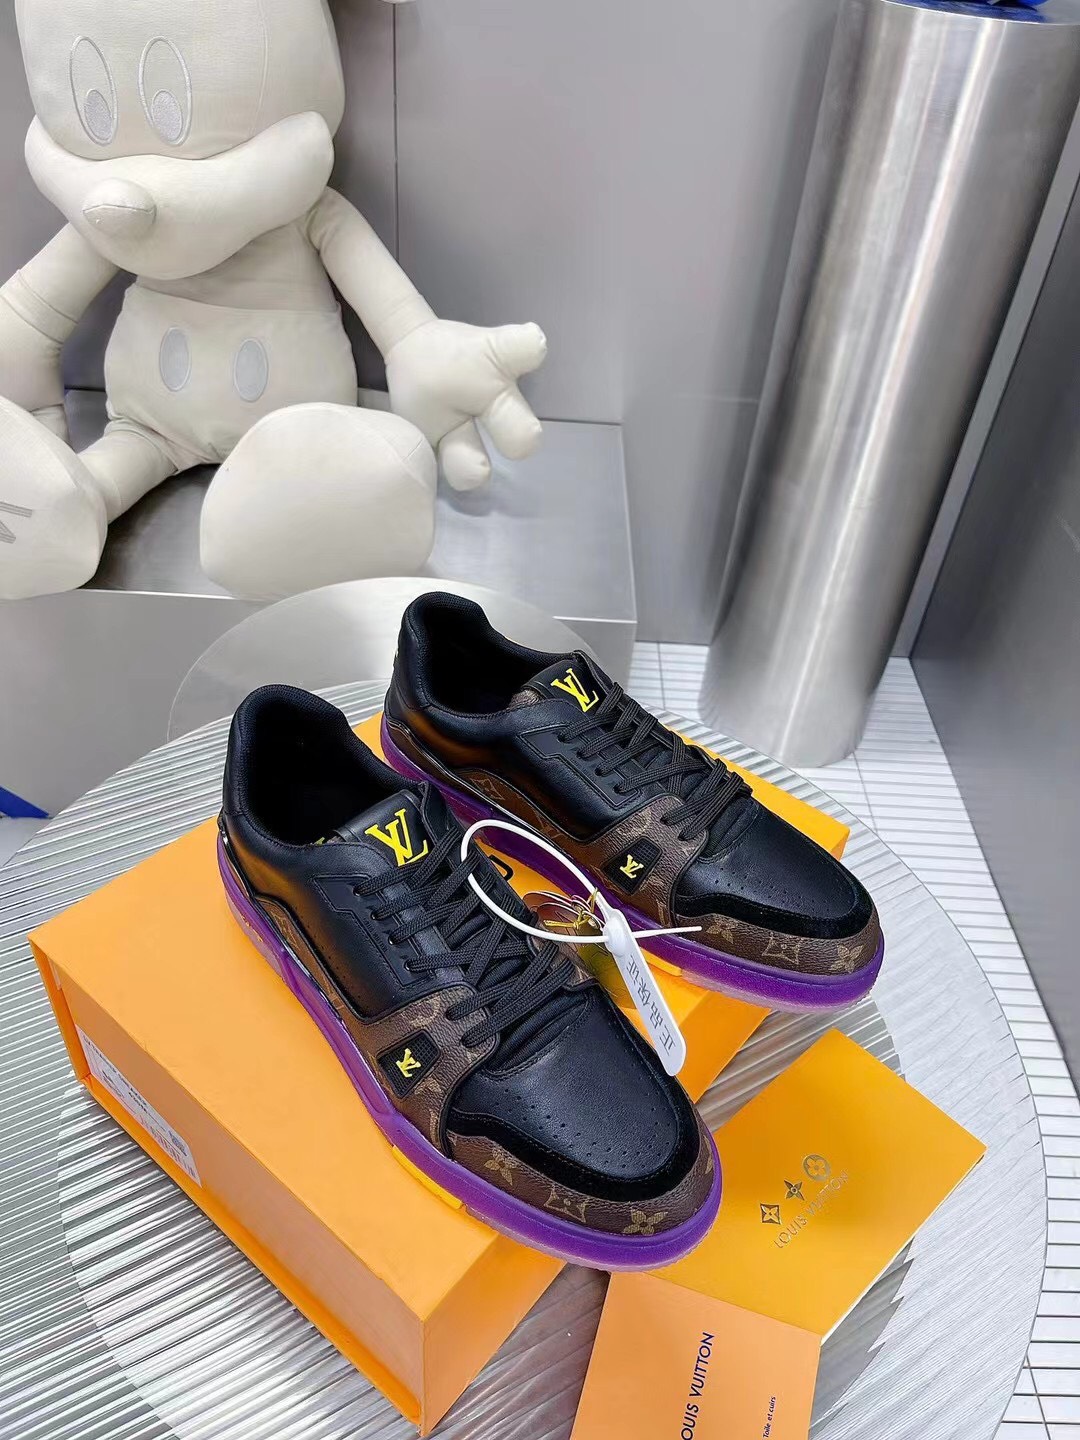 LV TRAINER SNEAKER X LV VIRGIL ABLOH - Replica Bags and Shoes online ...